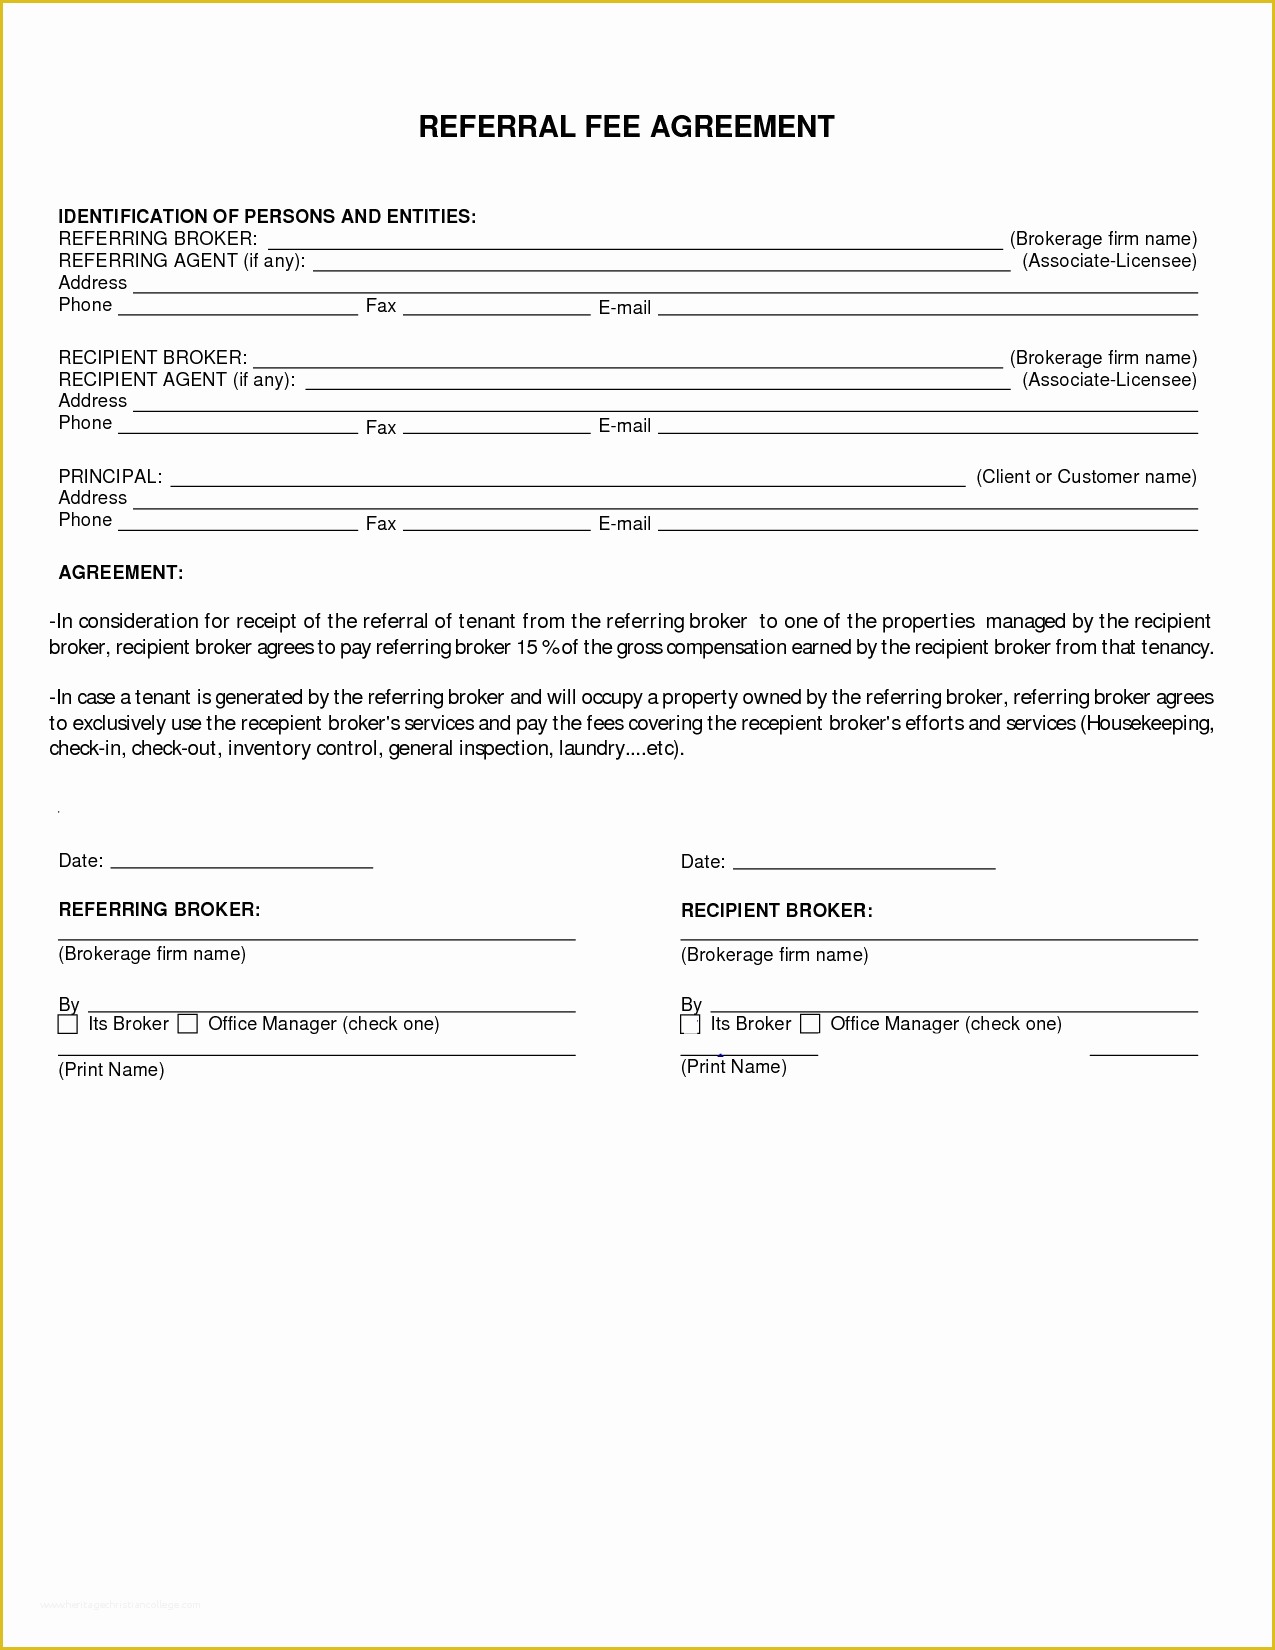 Free Real Estate Referral form Template Of Referral Agreement Related Keywords Referral Agreement